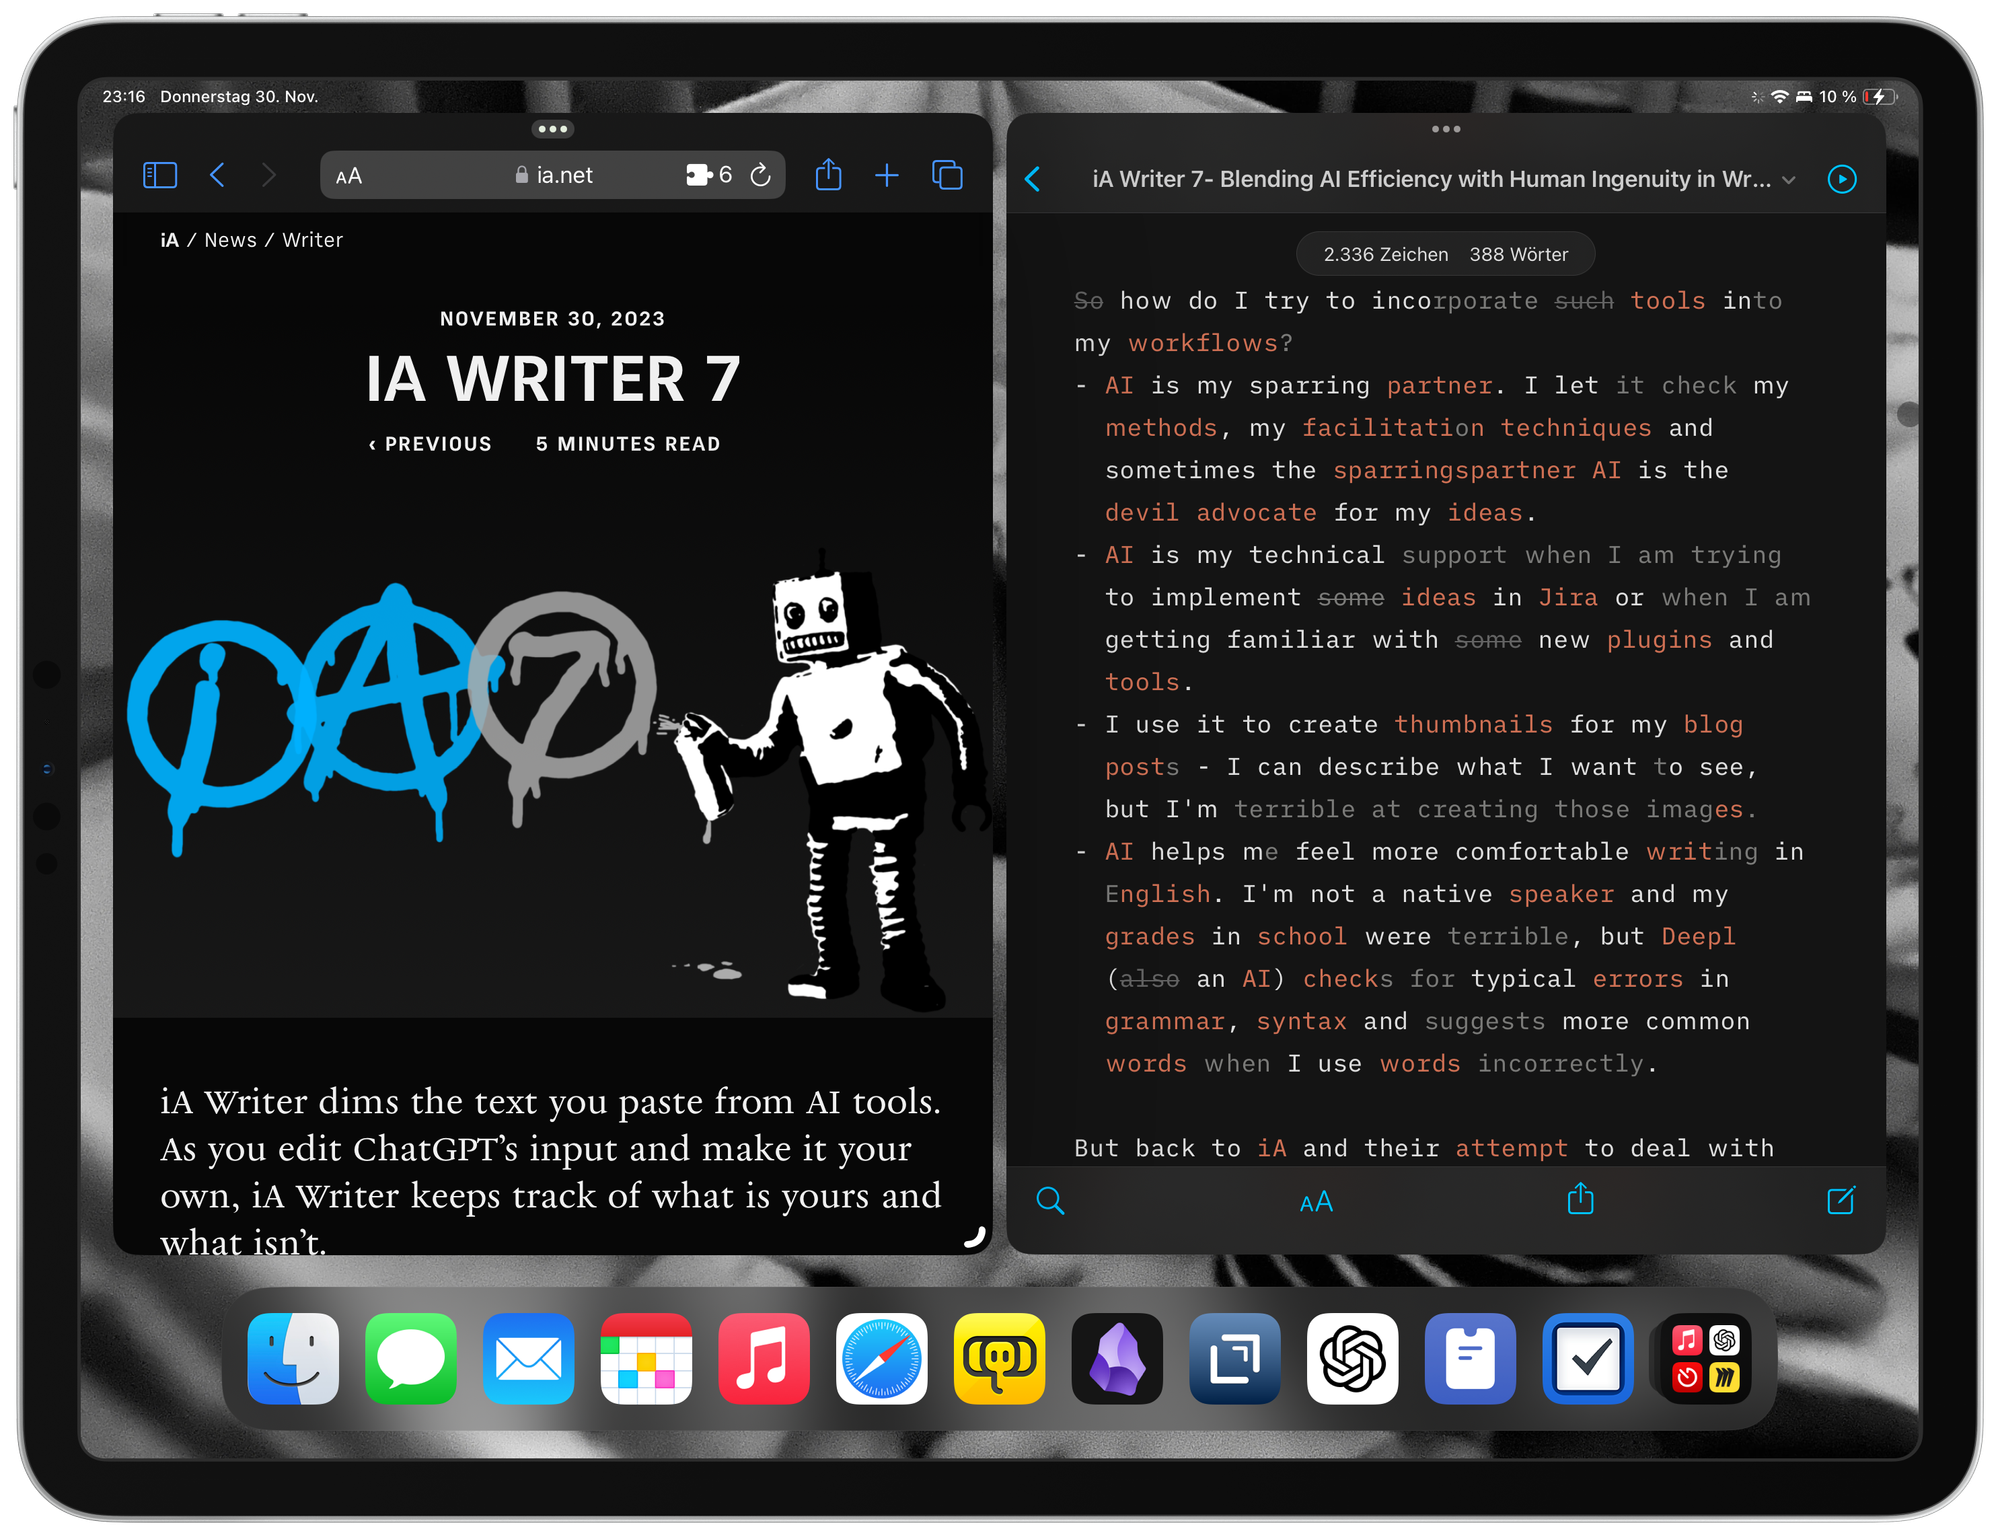 iA Writer 7: Blending AI Efficiency with Human Ingenuity in Writing